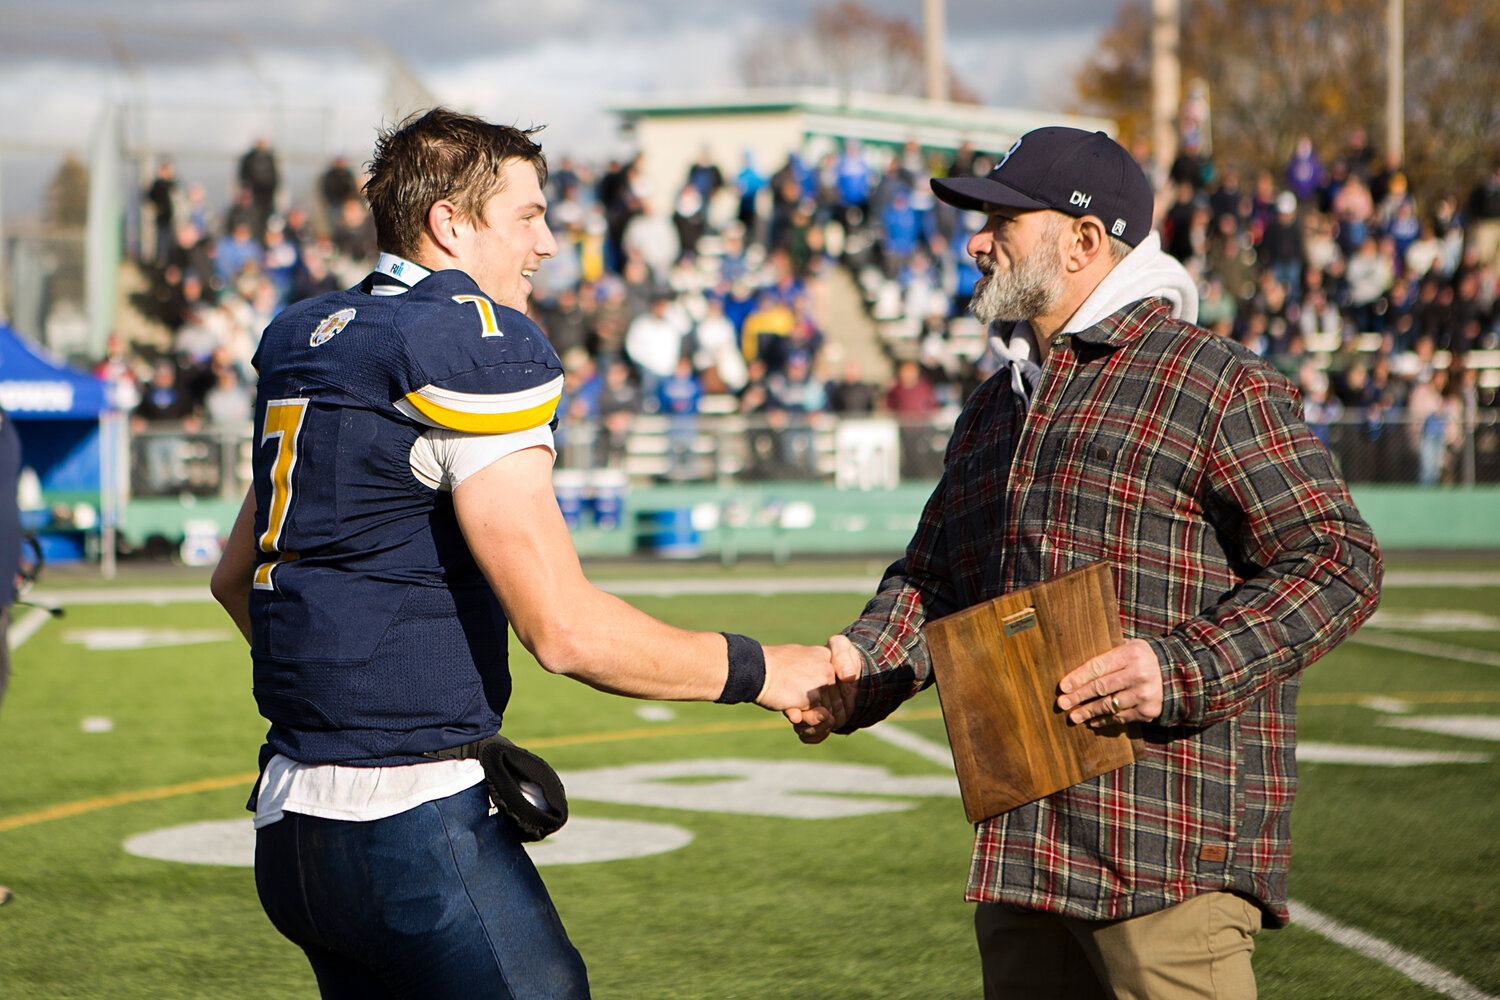 Alex McClelland is awarded MVP at the conclusion of Saturday's D2 Championship against Cumberland.